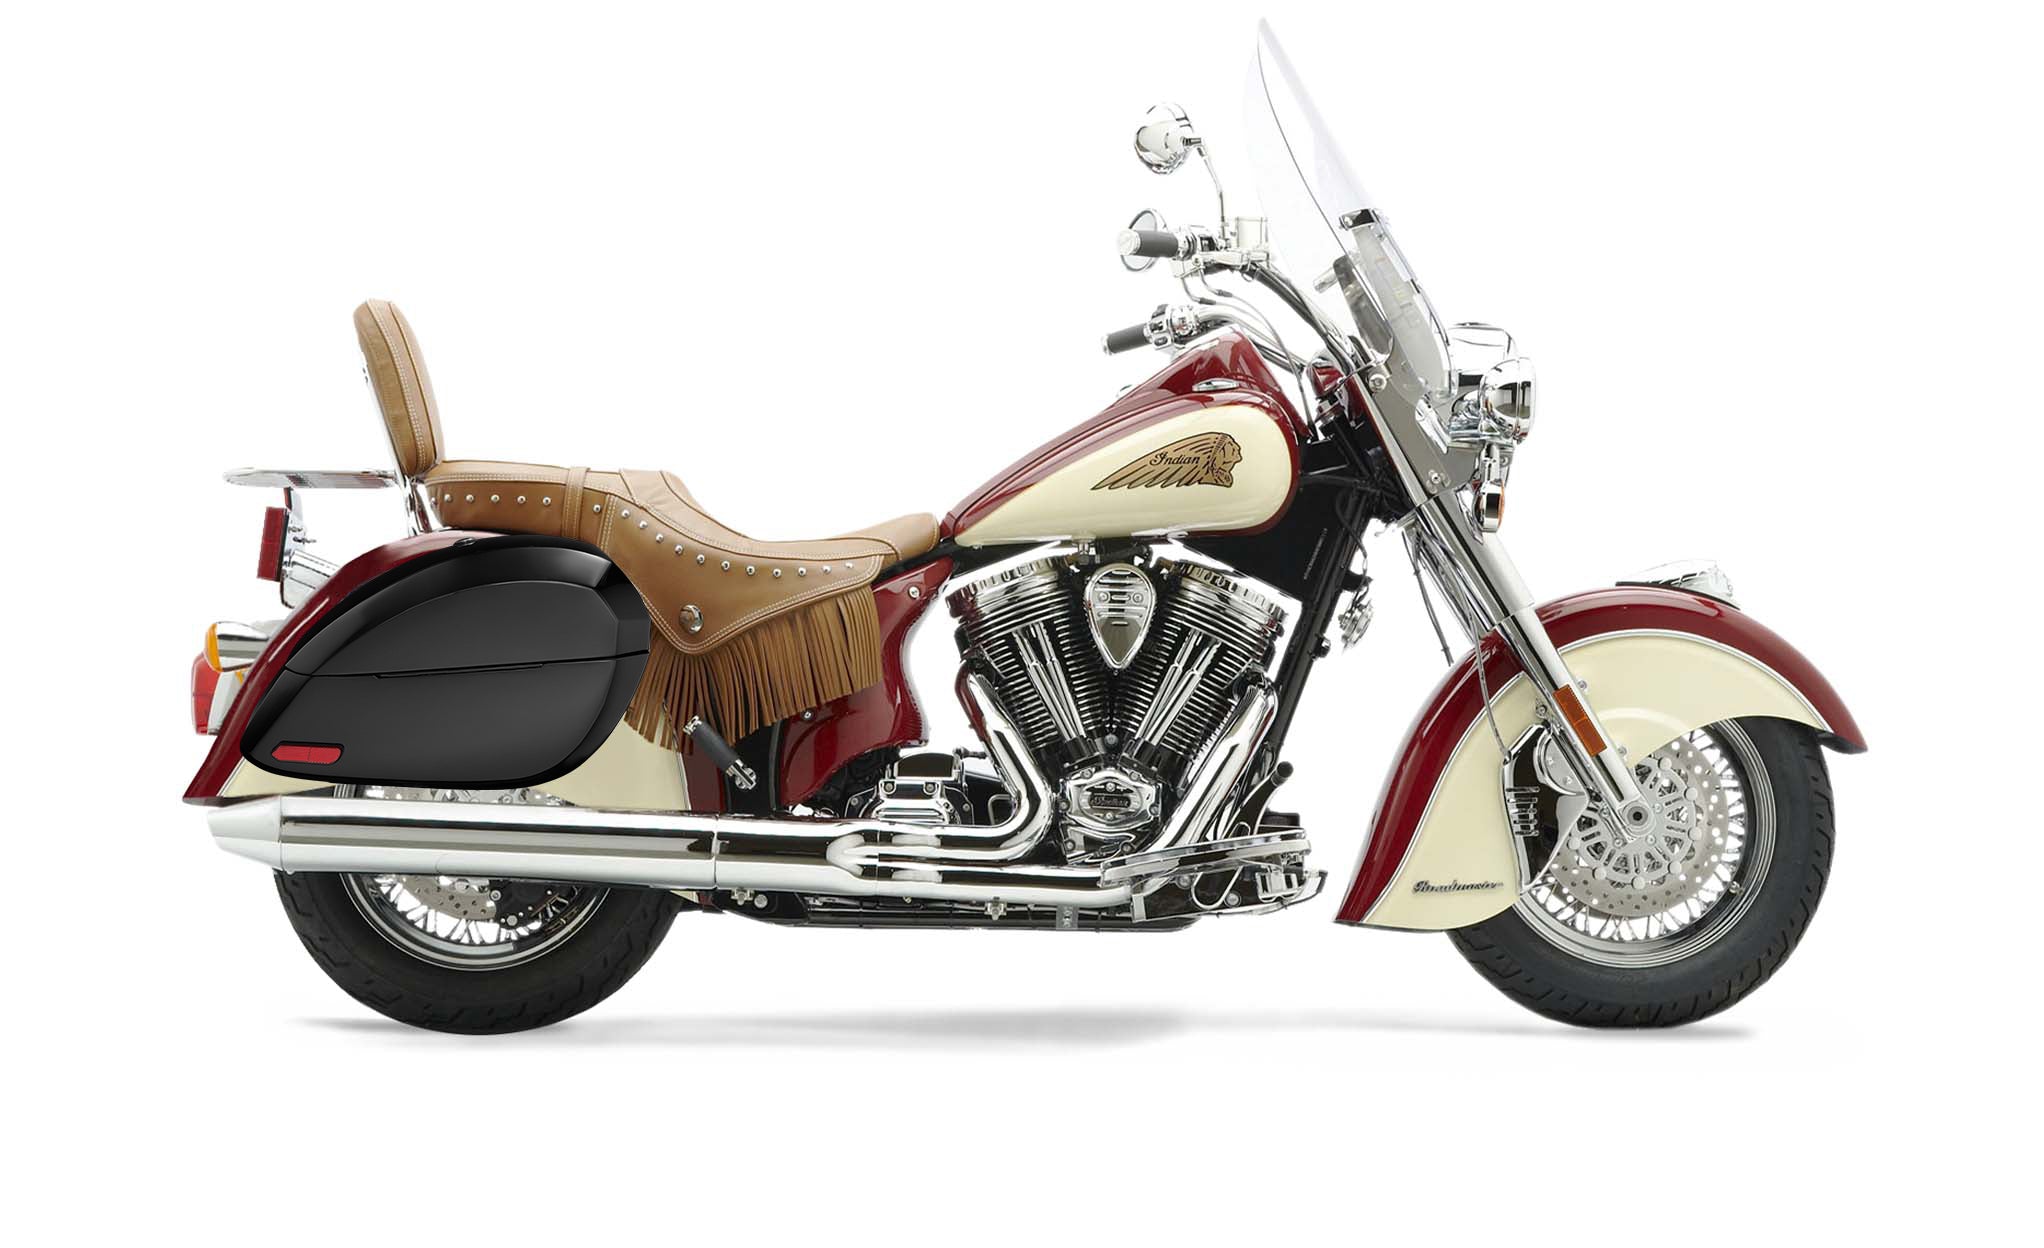 Viking Phantom Large Indian Chief Roadmaster Painted Motorcycle Hard Saddlebags Engineering Excellence with Bag on Bike @expand